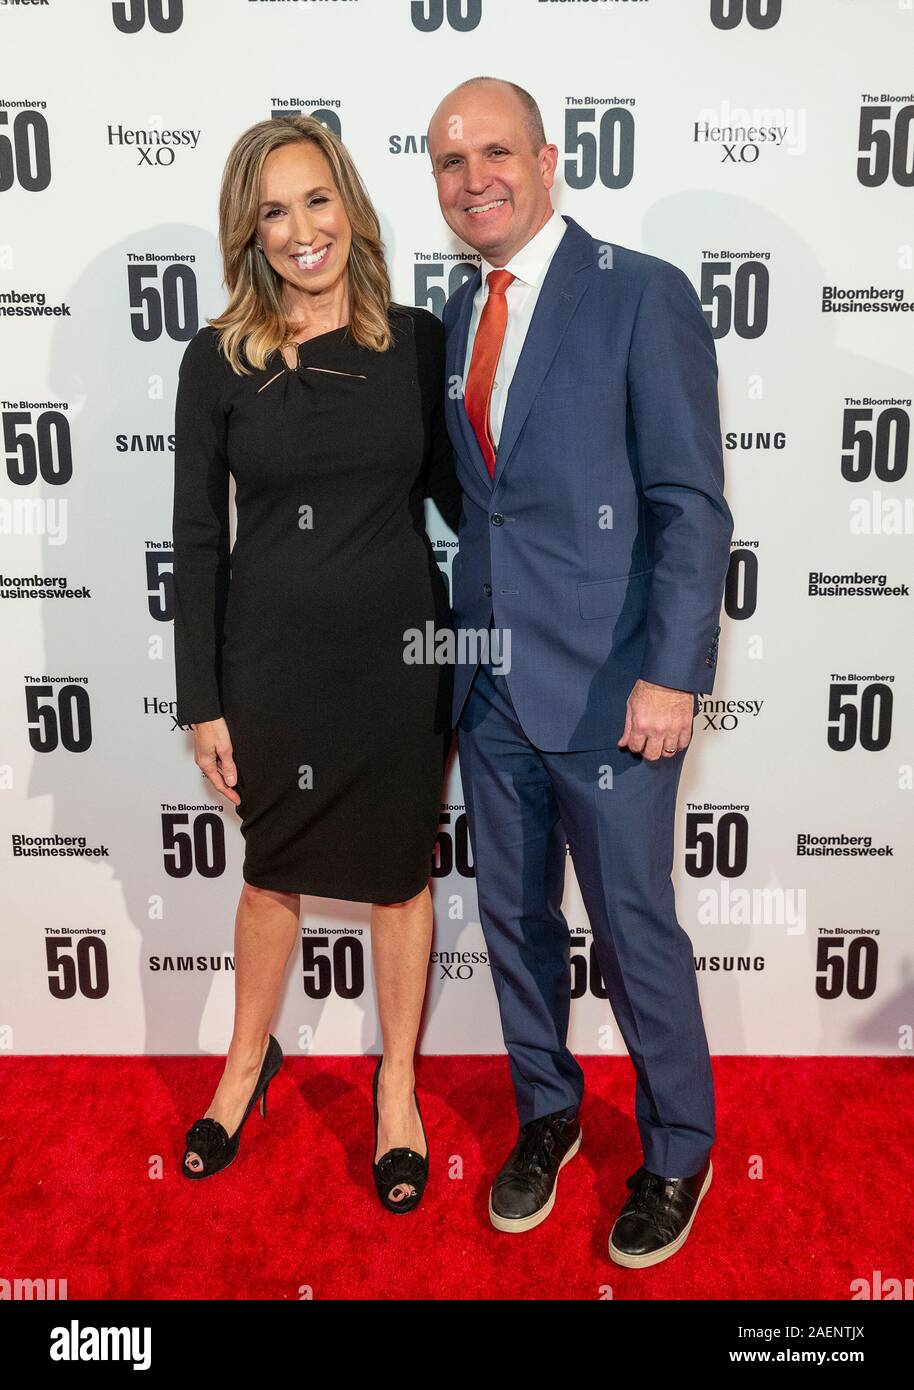 New York, United States. 09th Dec, 2019. Carol Massar and Jason Kelly attend 'The Bloomberg 50' Celebration at The Morgan Library (Photo by Lev Radin/Pacific Press) Credit: Pacific Press Agency/Alamy Live News Stock Photo